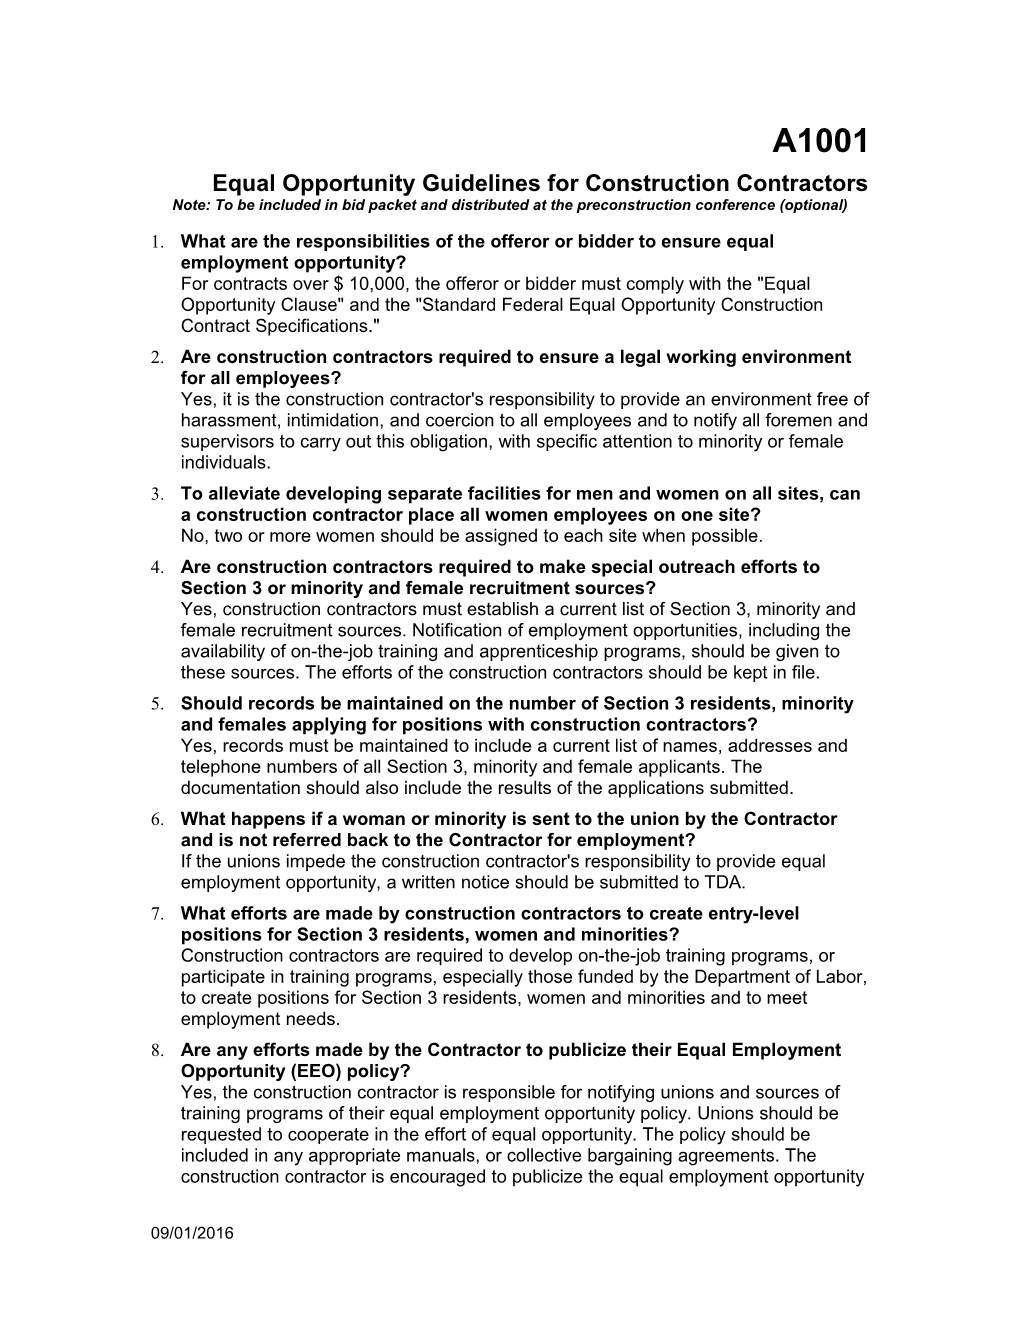 Equal Opportunity Guidelines for Construction Contractors